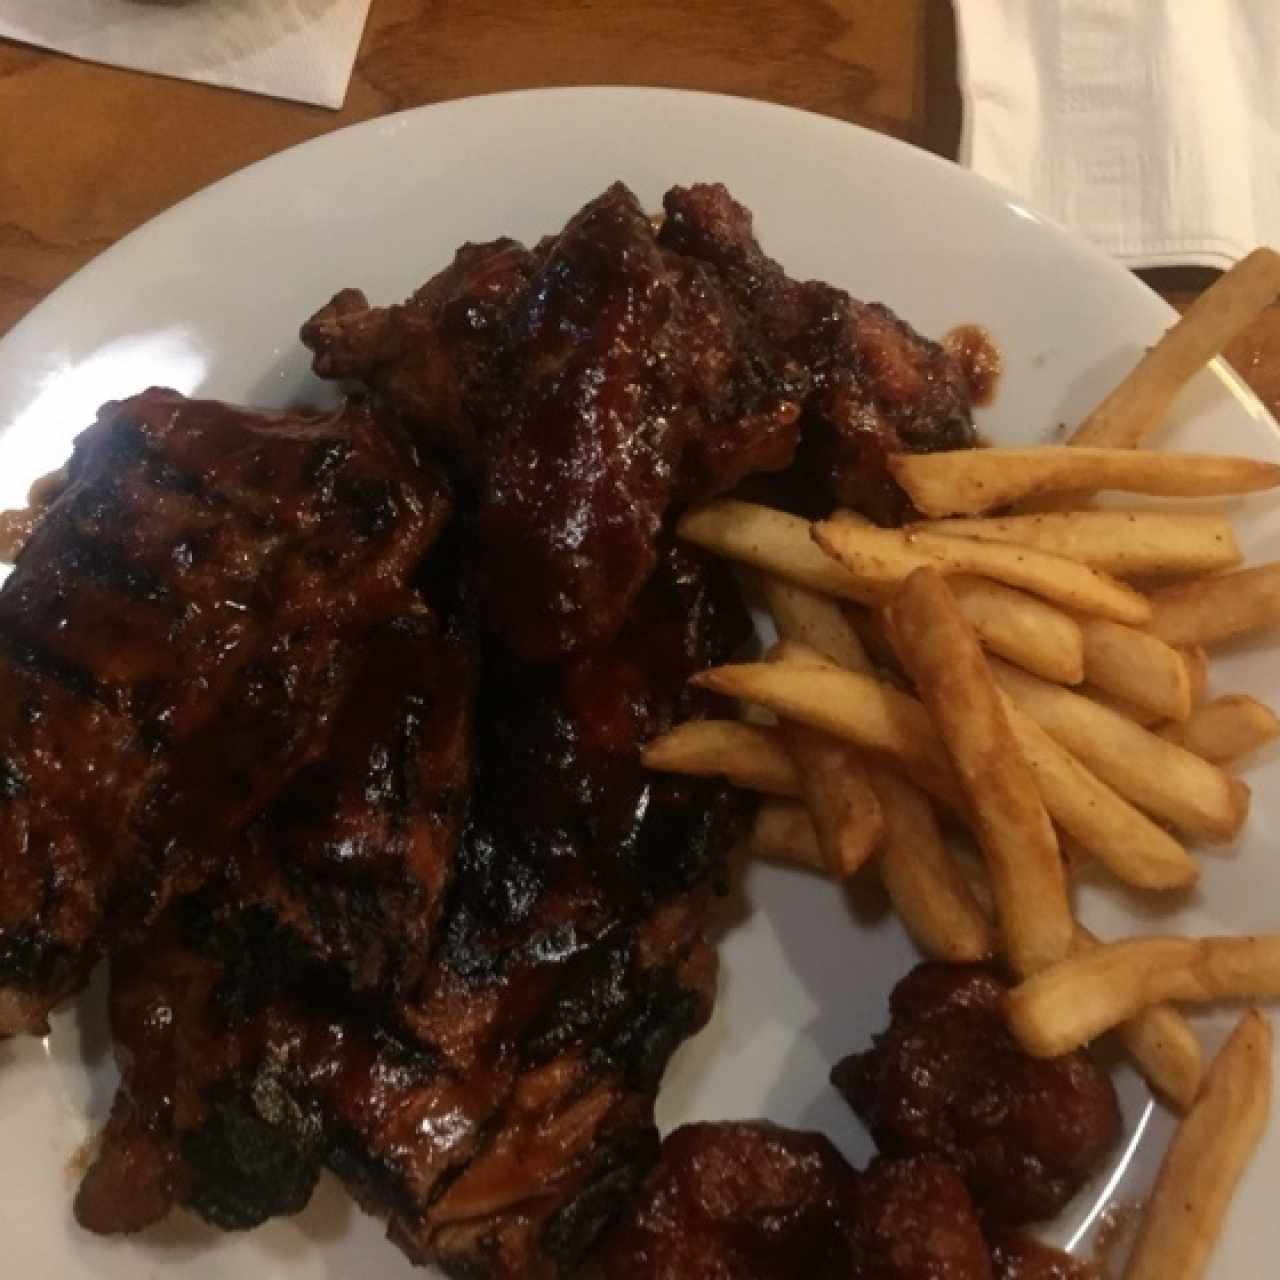 all you can eat ribs, boneless, wings